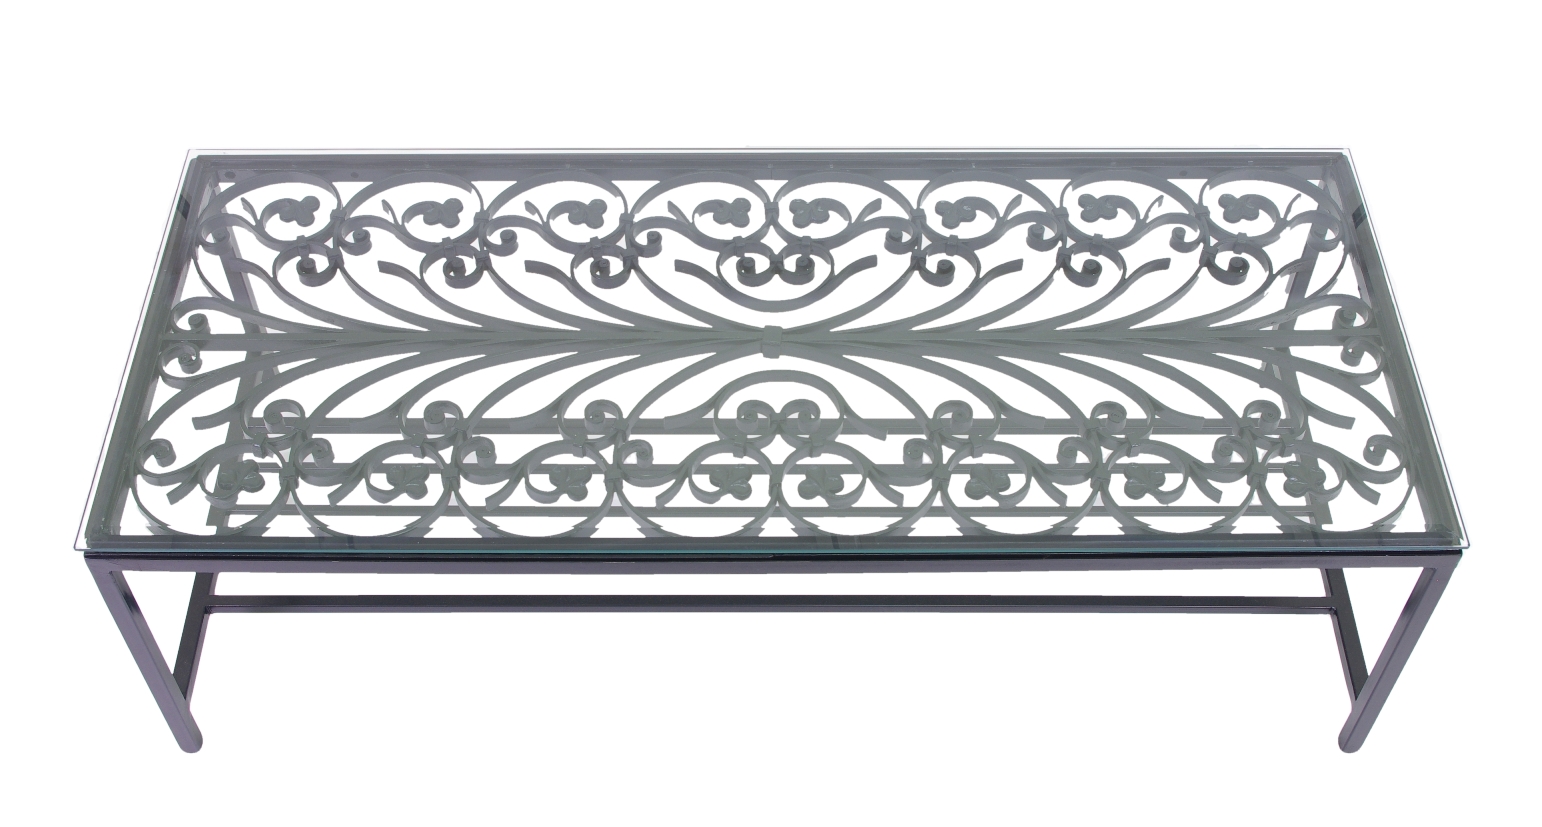 French Wrought Iron Window Guard Mounted as a Coffee Table, Mid 19th c.